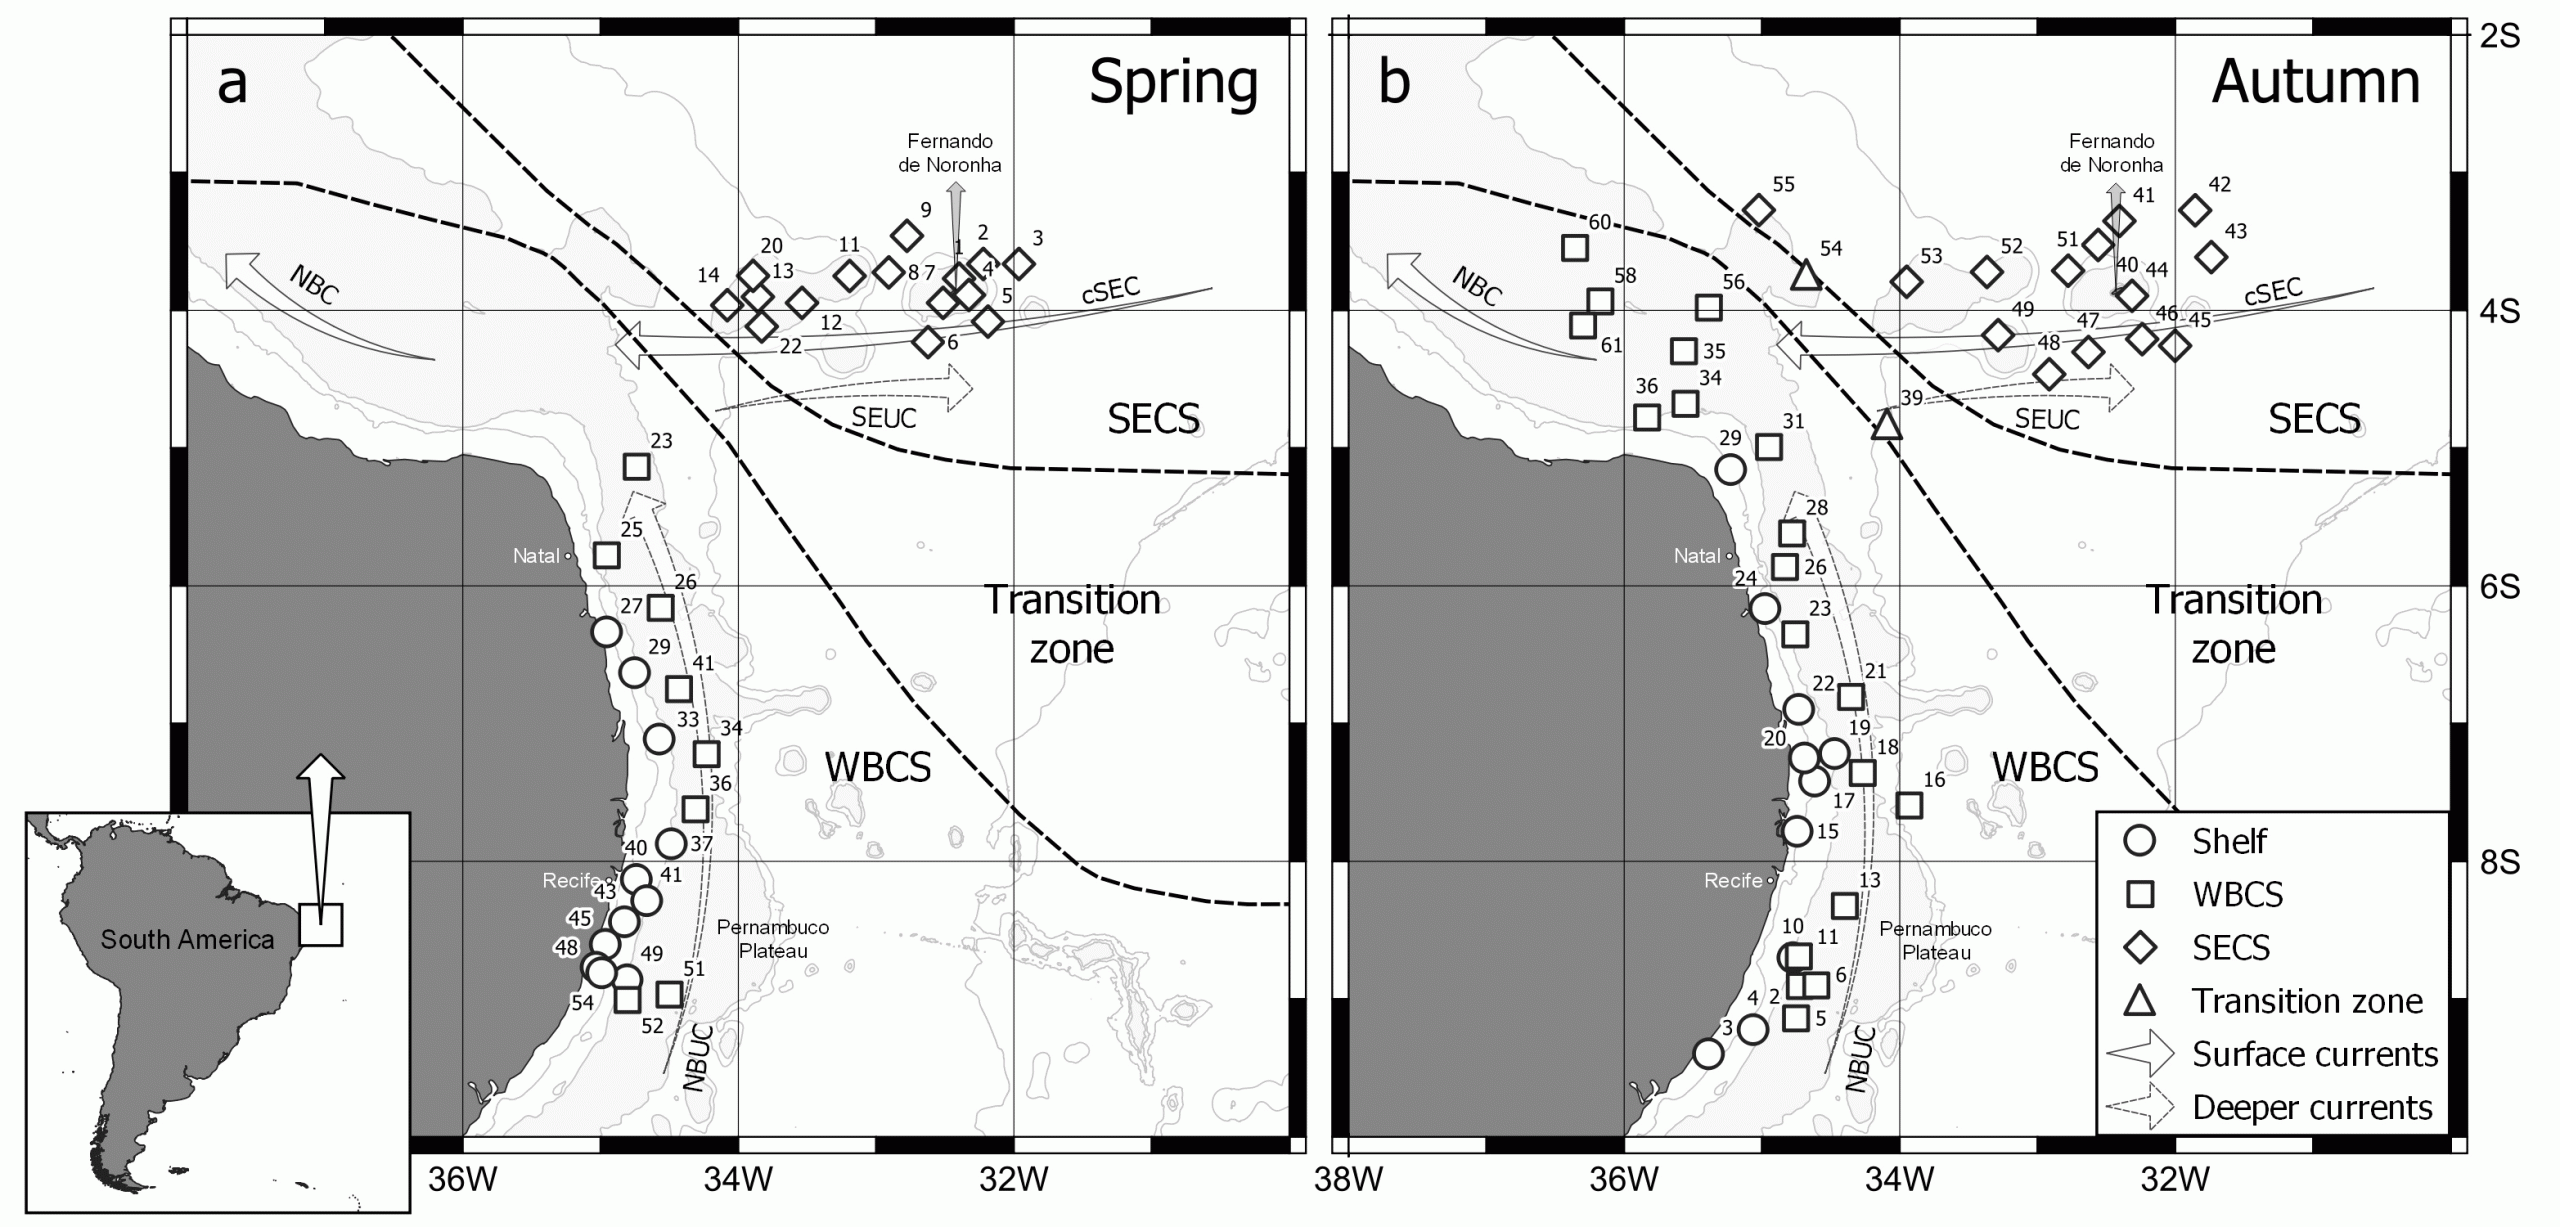 Abundance data of planktonic cnidarians collected during the ABRACOS 1 and 2 surveys performed along the northeast Brazilian continental shelf, slope and open ocean